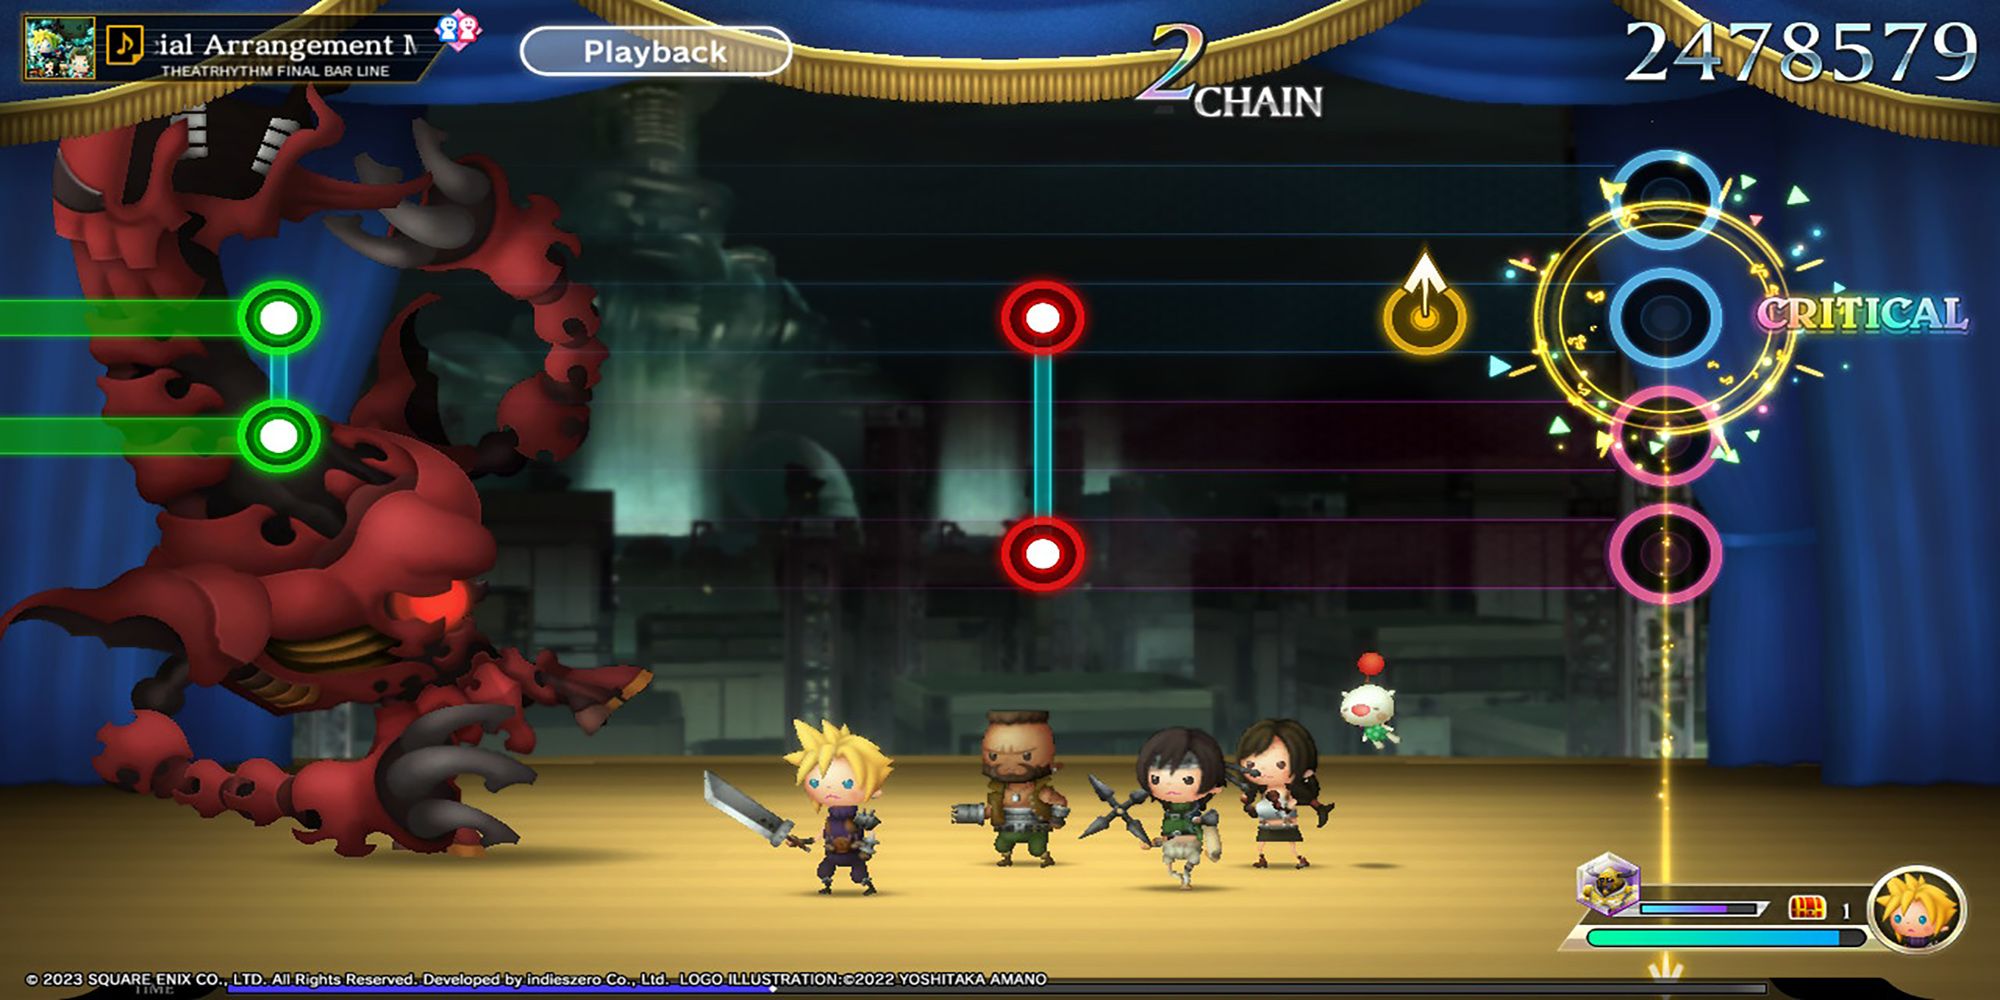 Cloud, Barret, Yuffie, and Tifa fight a monster on a stage with a Final Fantasy 7 backdrop in Theatrhythm: Final Bar Line. Pink and Blue rows indicate Pair Style gameplay. 